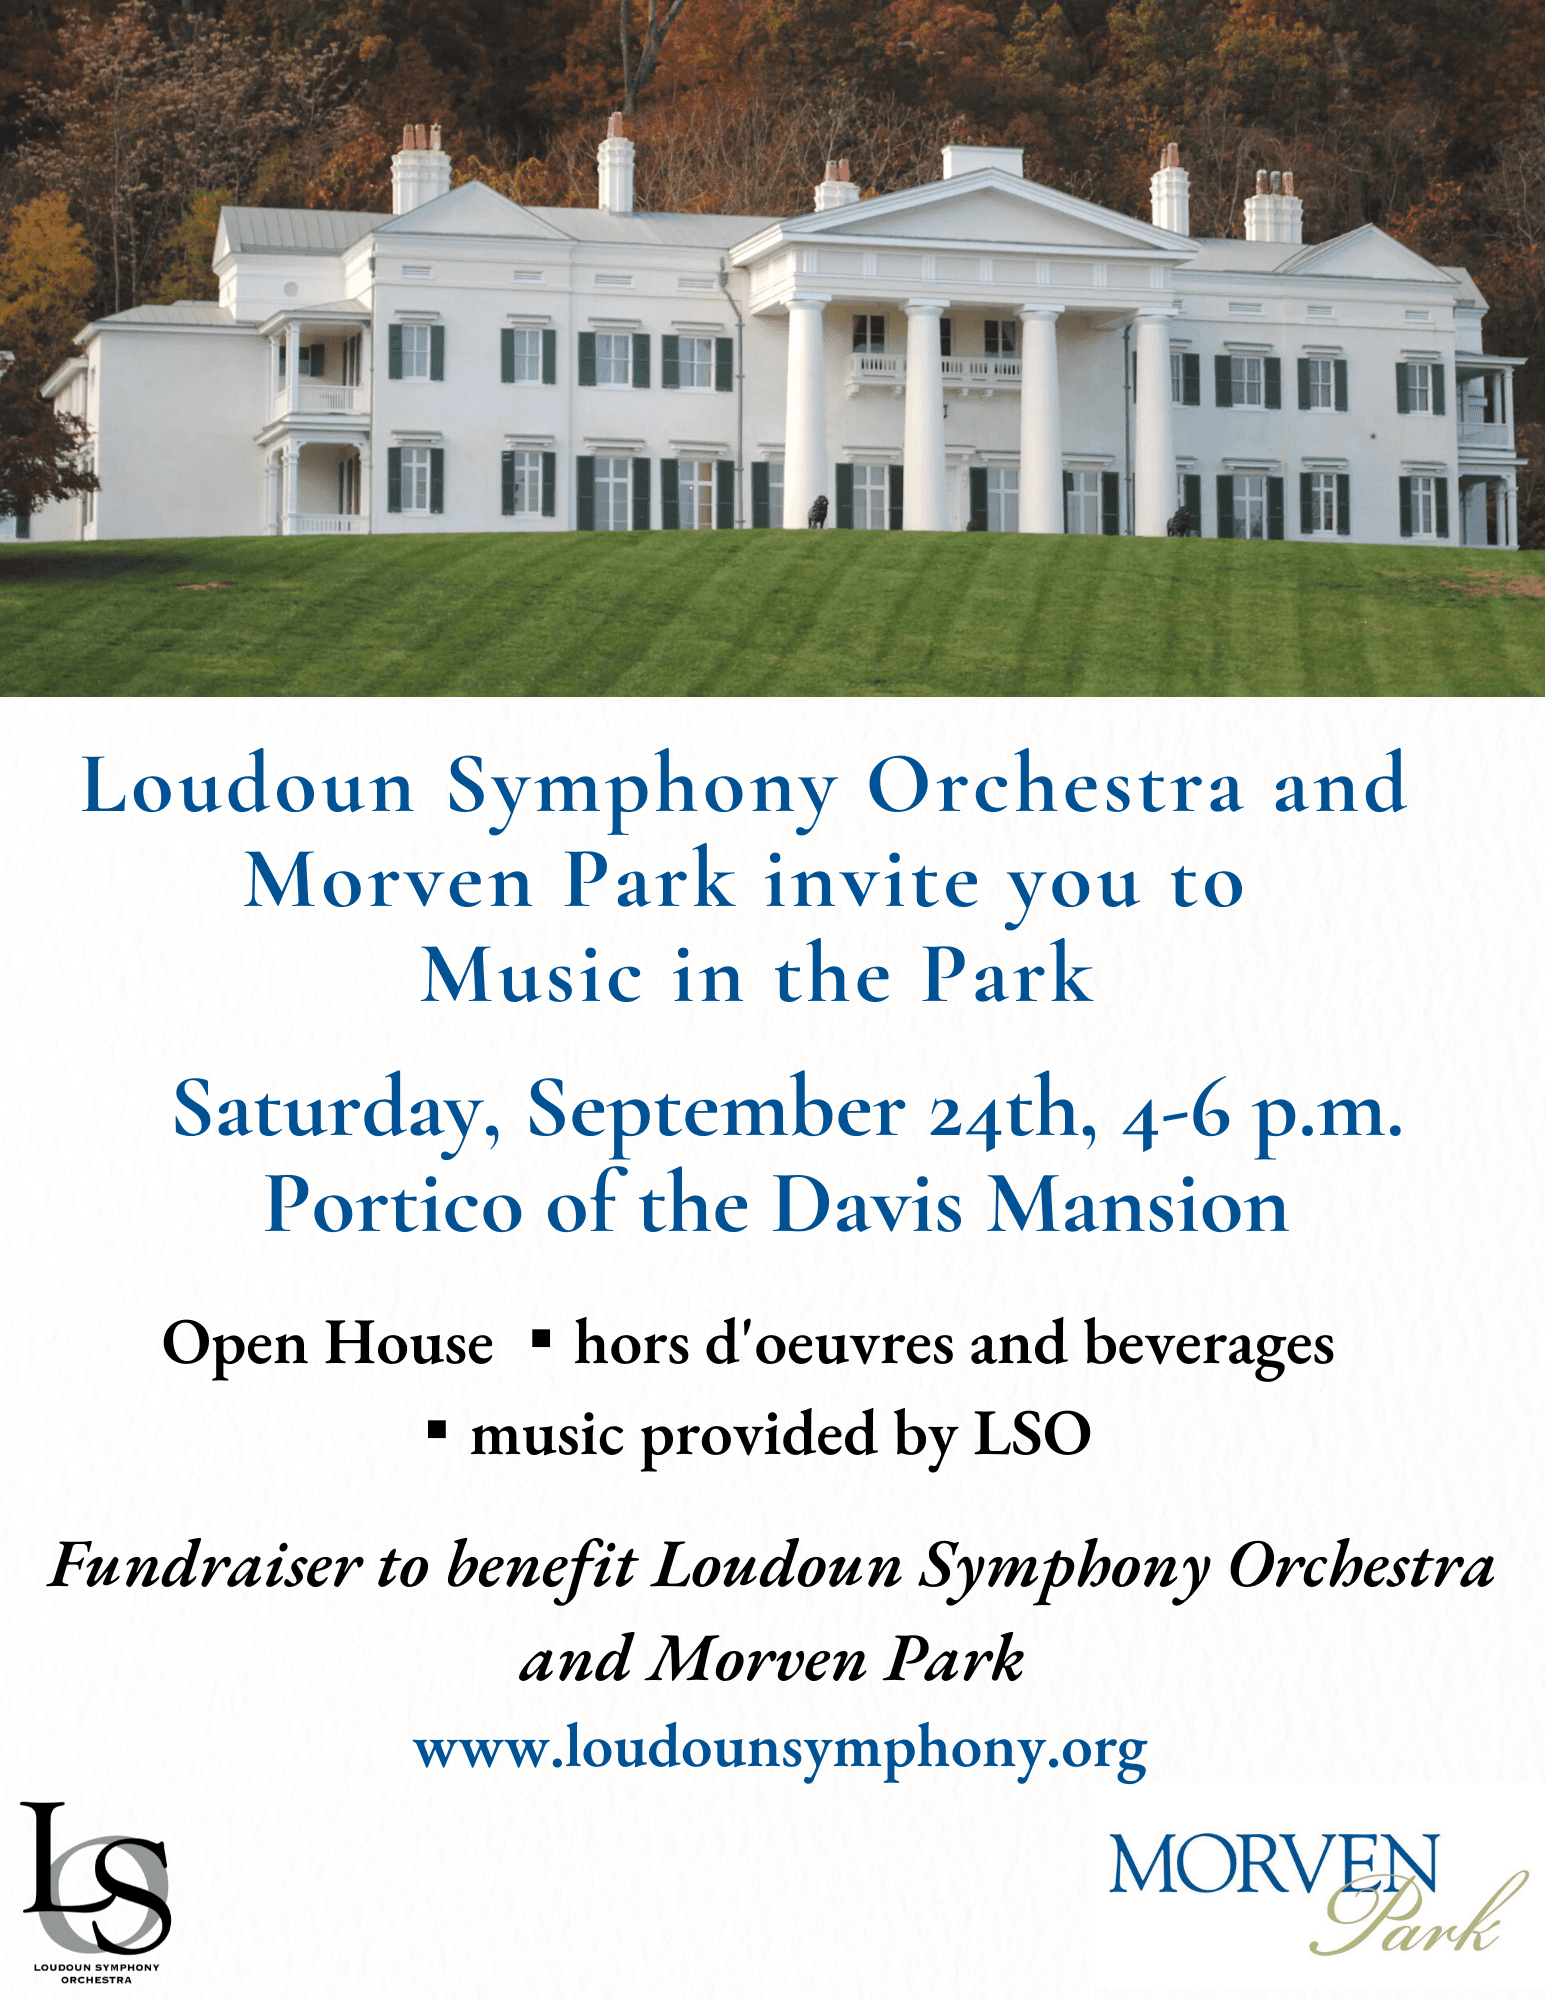 Loudoun Symphony Orchestra and Morven Park invite you to Music in the Park 